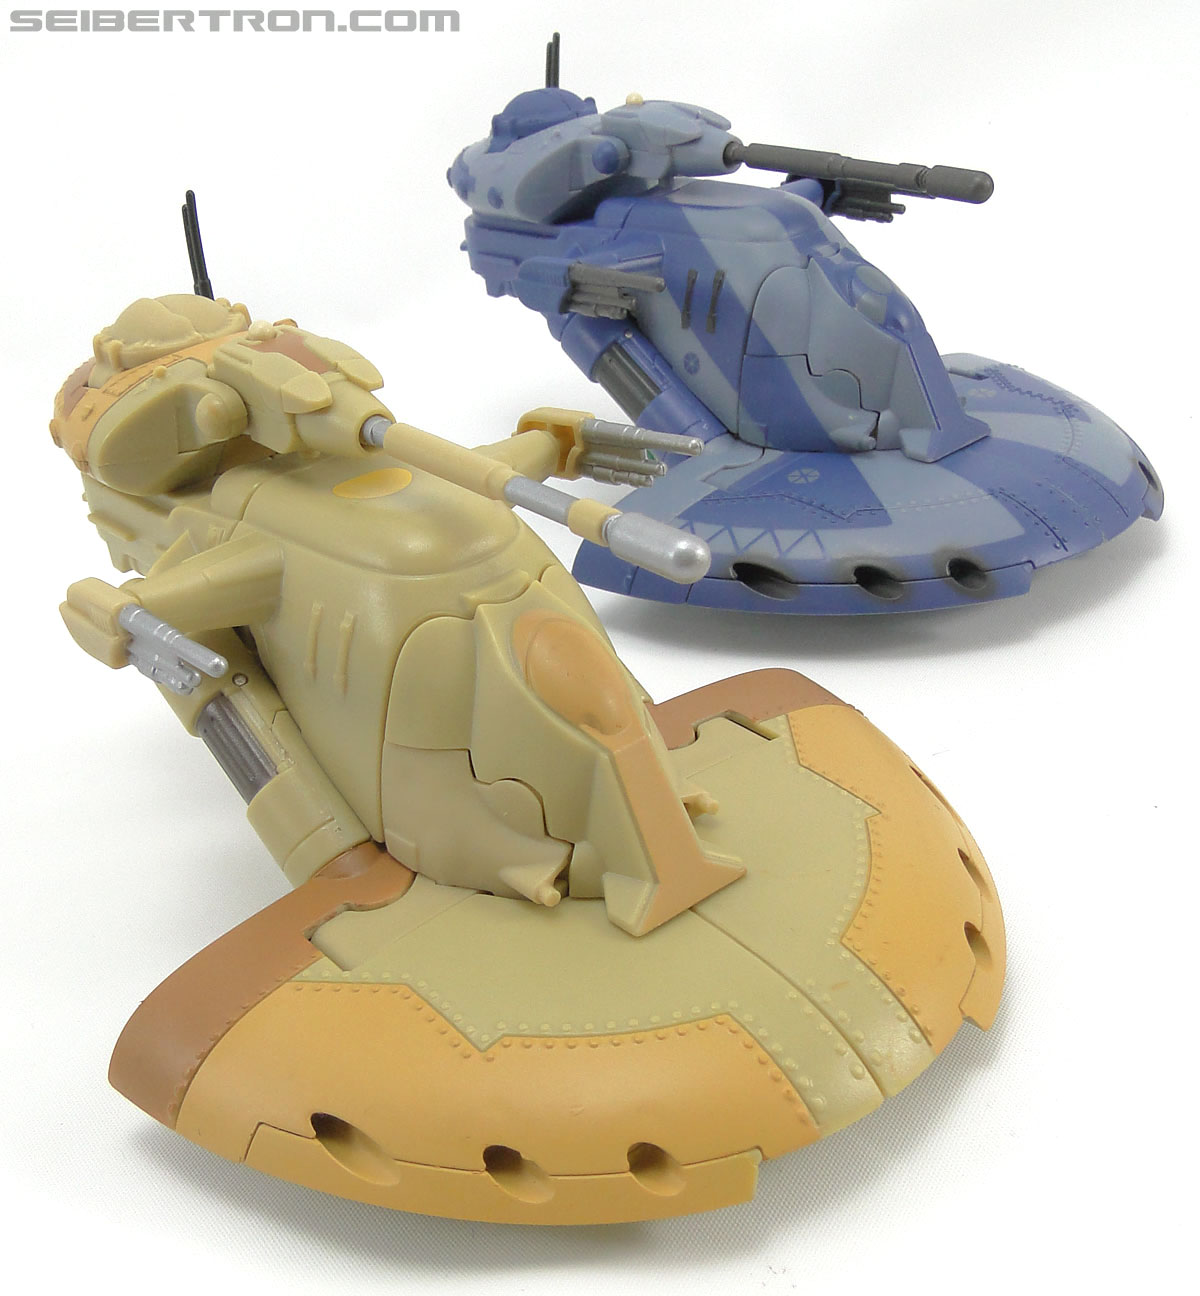 Star Wars Transformers Battle Droid Commader (Armored Assault Tank) (Battle Droid Commader) (Image #28 of 85)